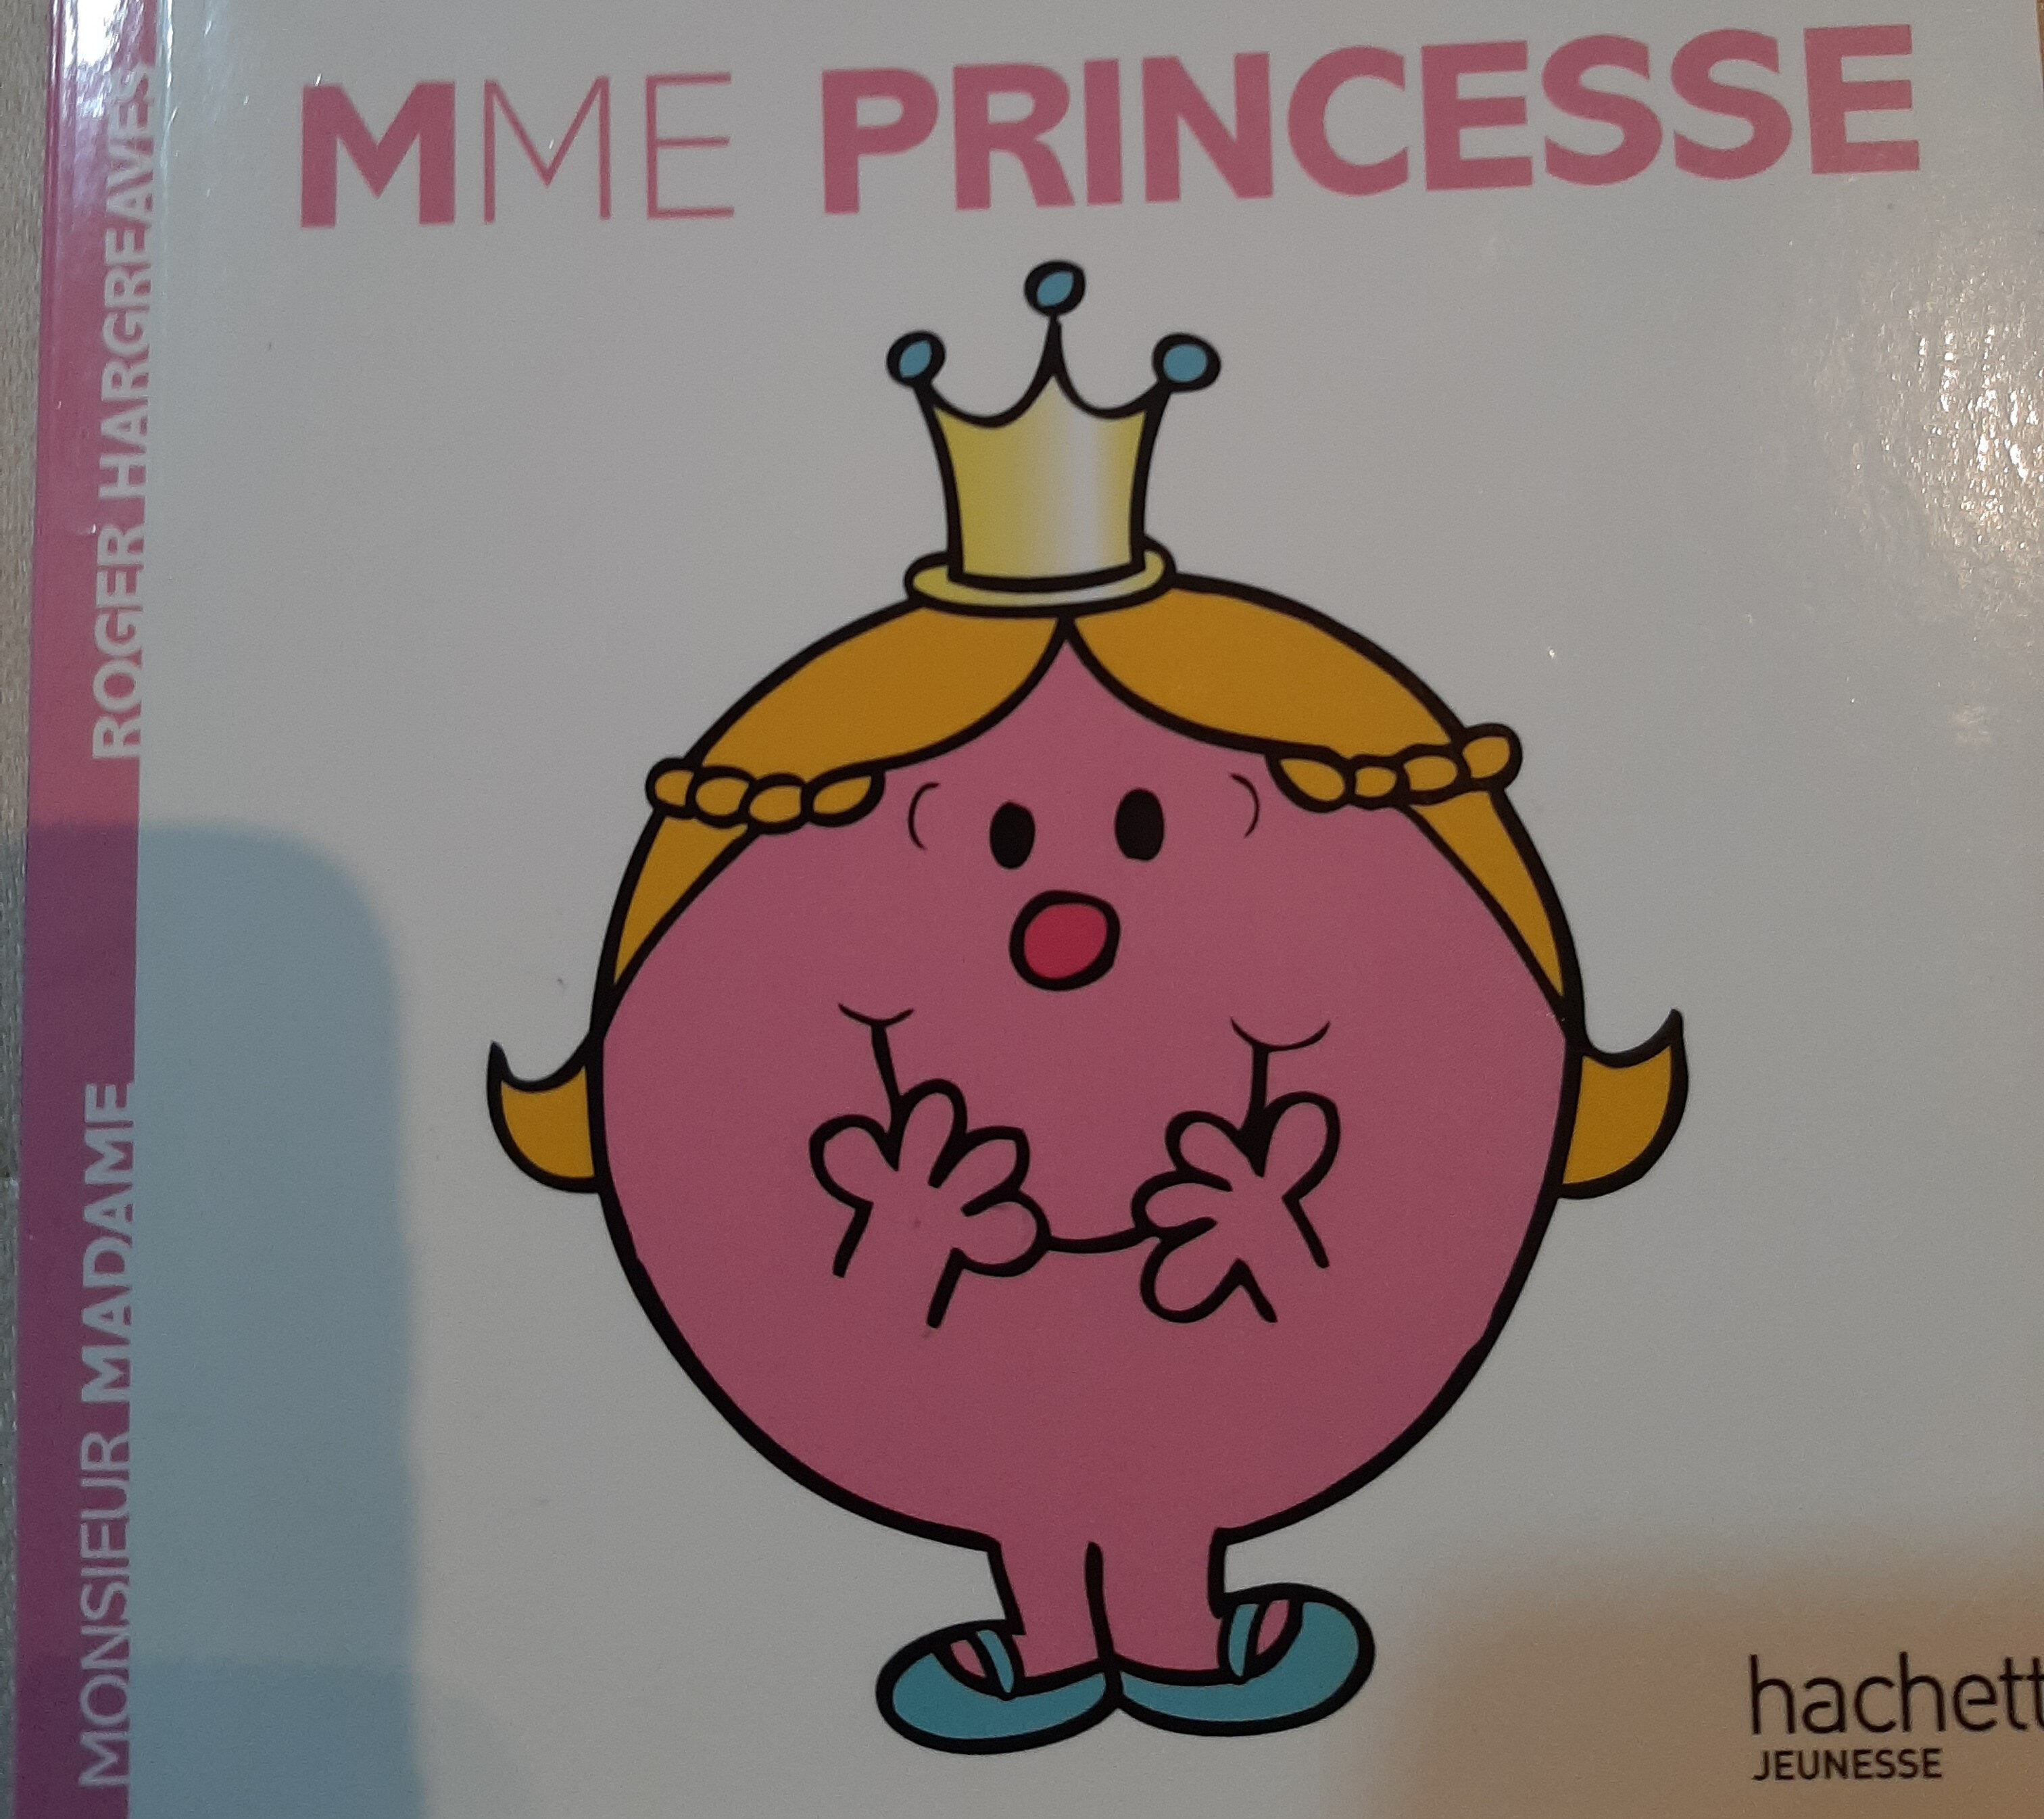 mme princesse book in french - Product - fr